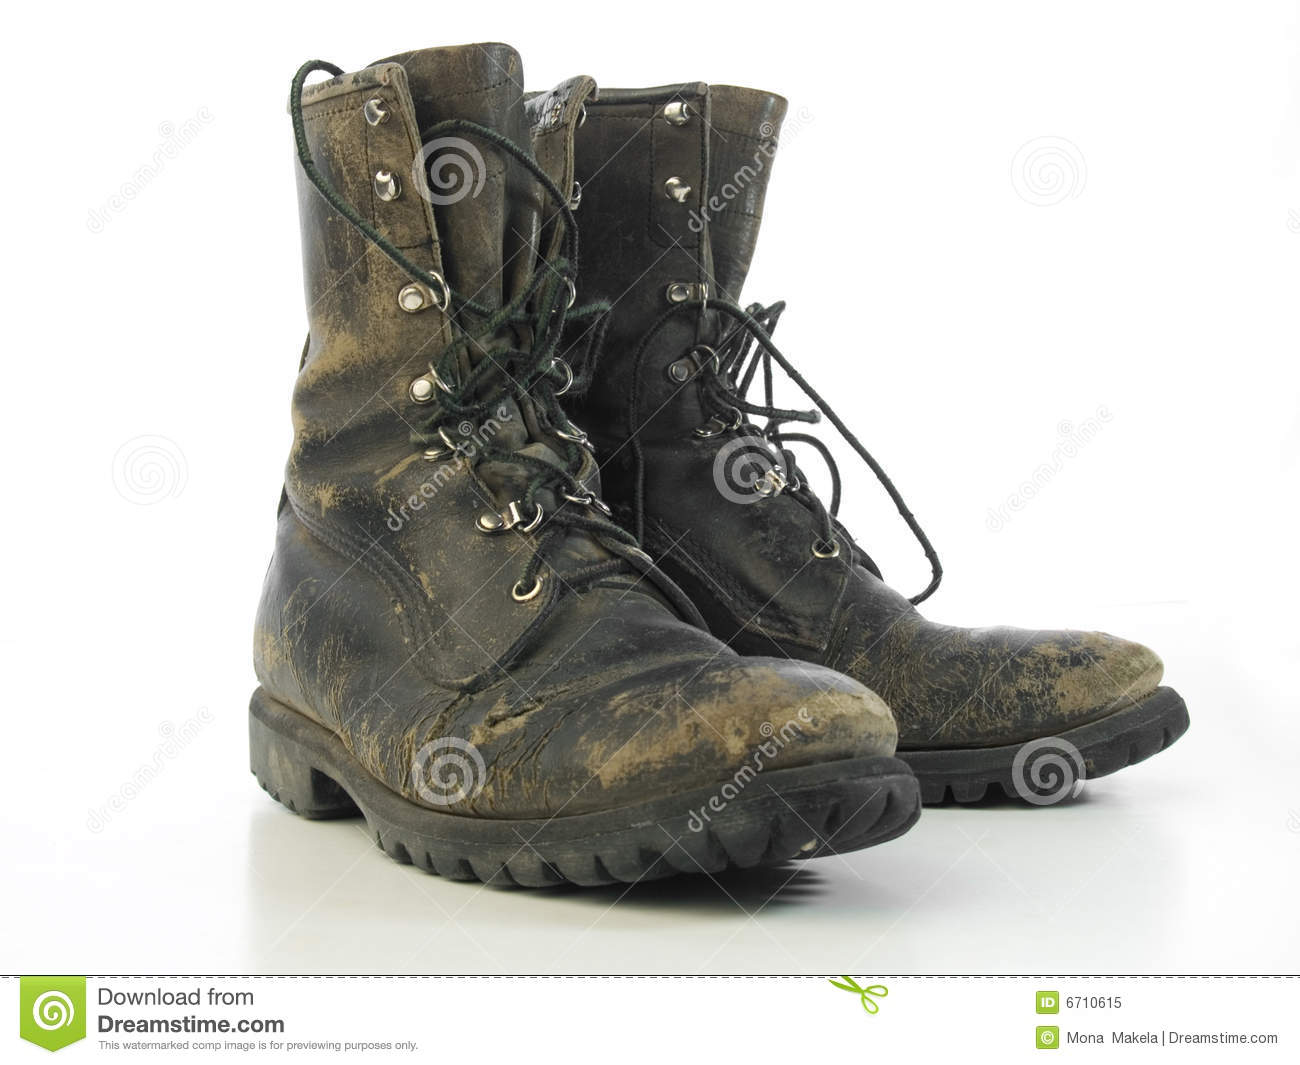 Pair Of Muddy Combat Boots Royalty Free Stock Photo   Image  6710615